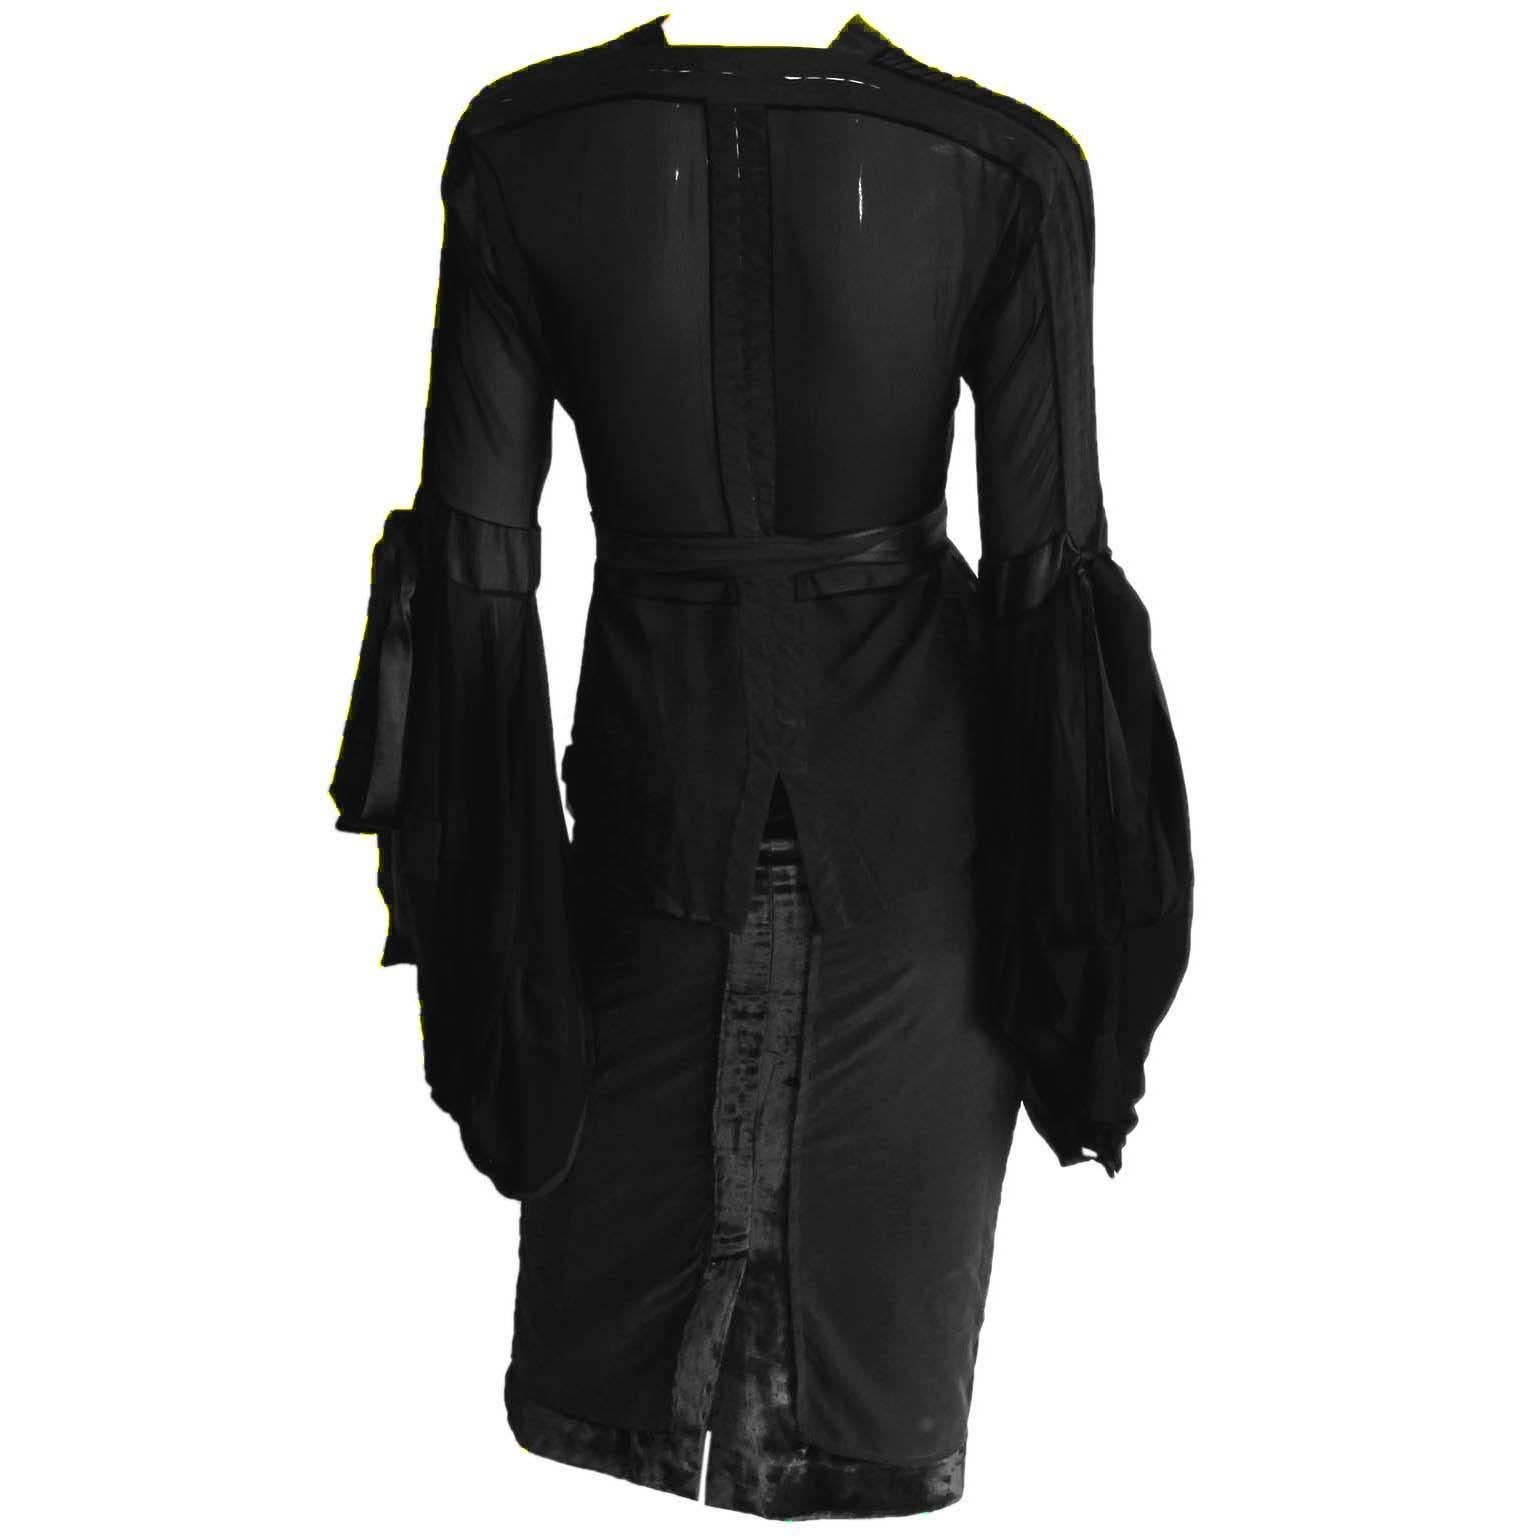 Rare & Iconic Tom Ford For YSL Rive Gauche Fall Winter 2002 Runway Collection Black Silk Poet Blouse & Skirt!

Who could ever forget Tom Ford's fall/winter 2002 show for Yves Saint Laurent Rive Gauche? Well this heavenly blouse was one of the